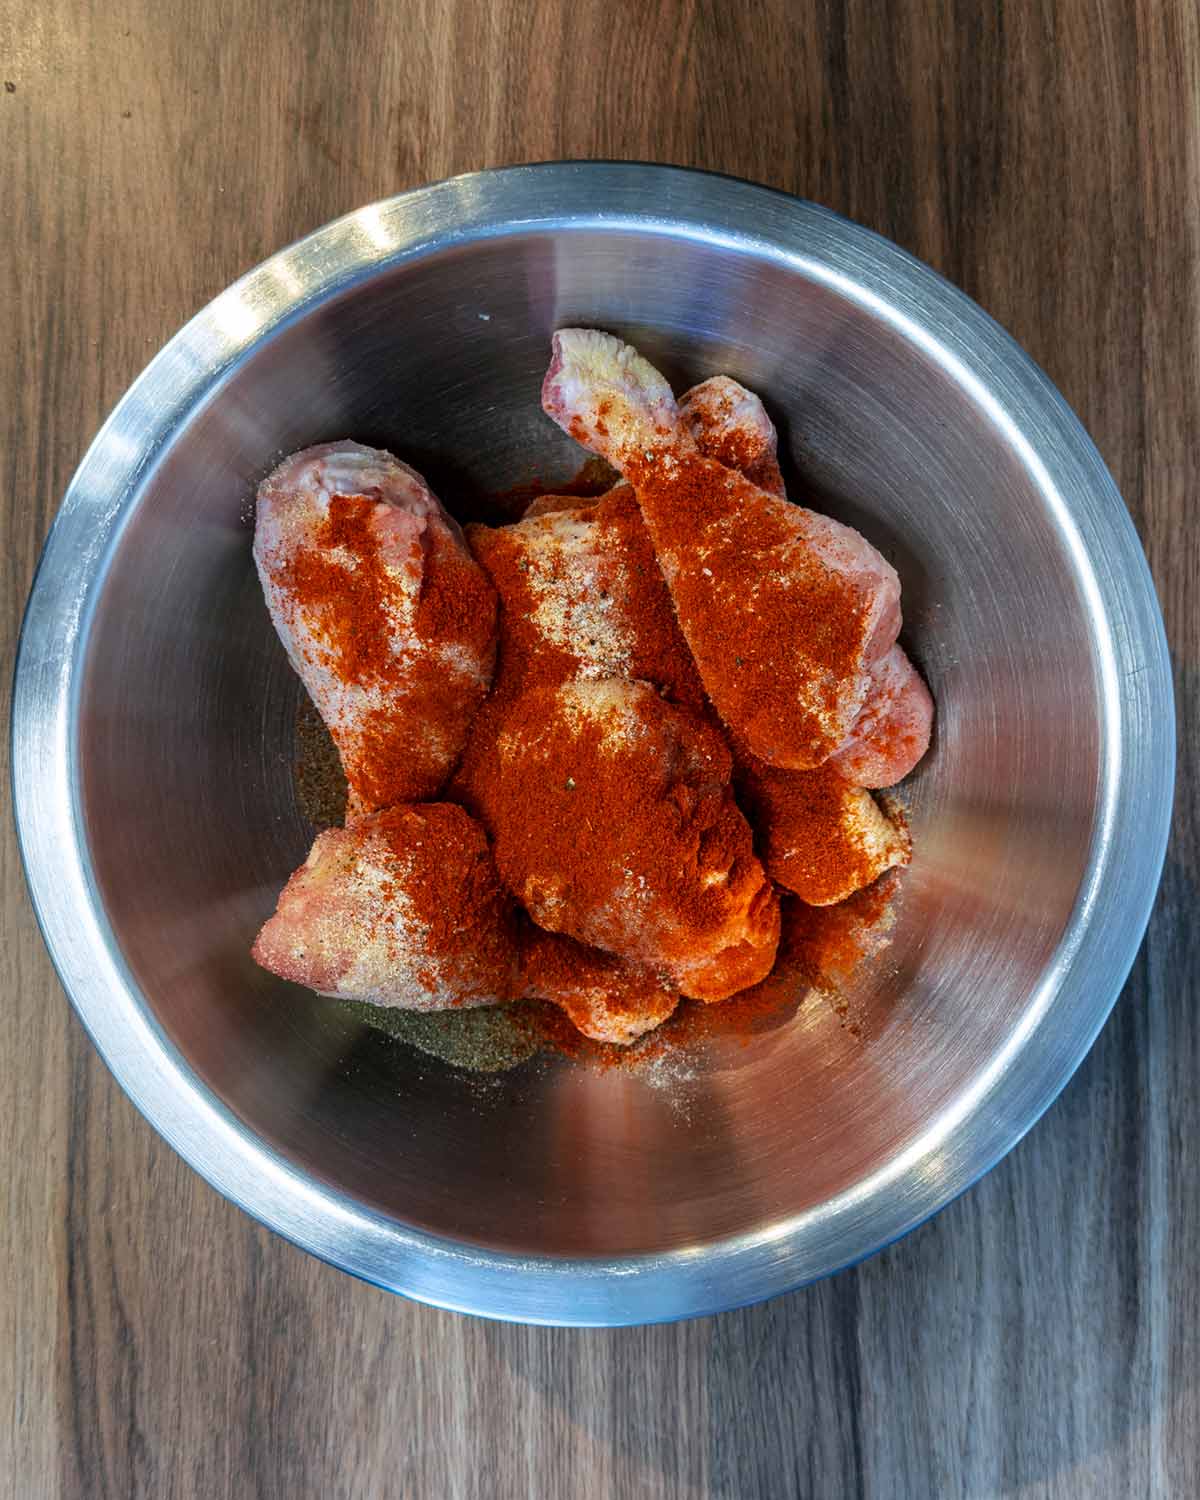 Raw chicken drumsticks in a bowl with oil and seasoning.